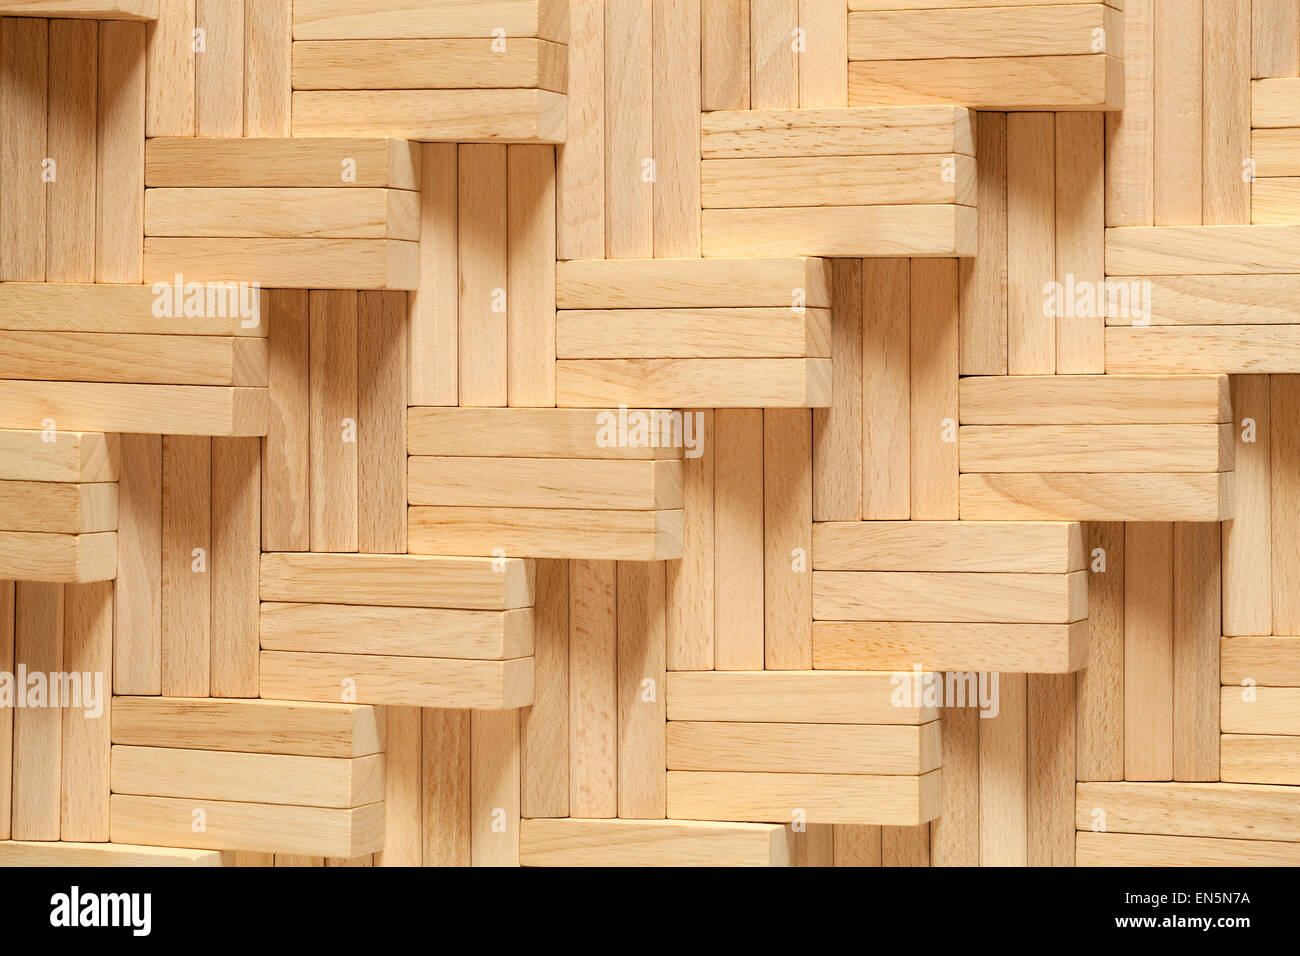 pattern arranged from blocks as background Stock Photo